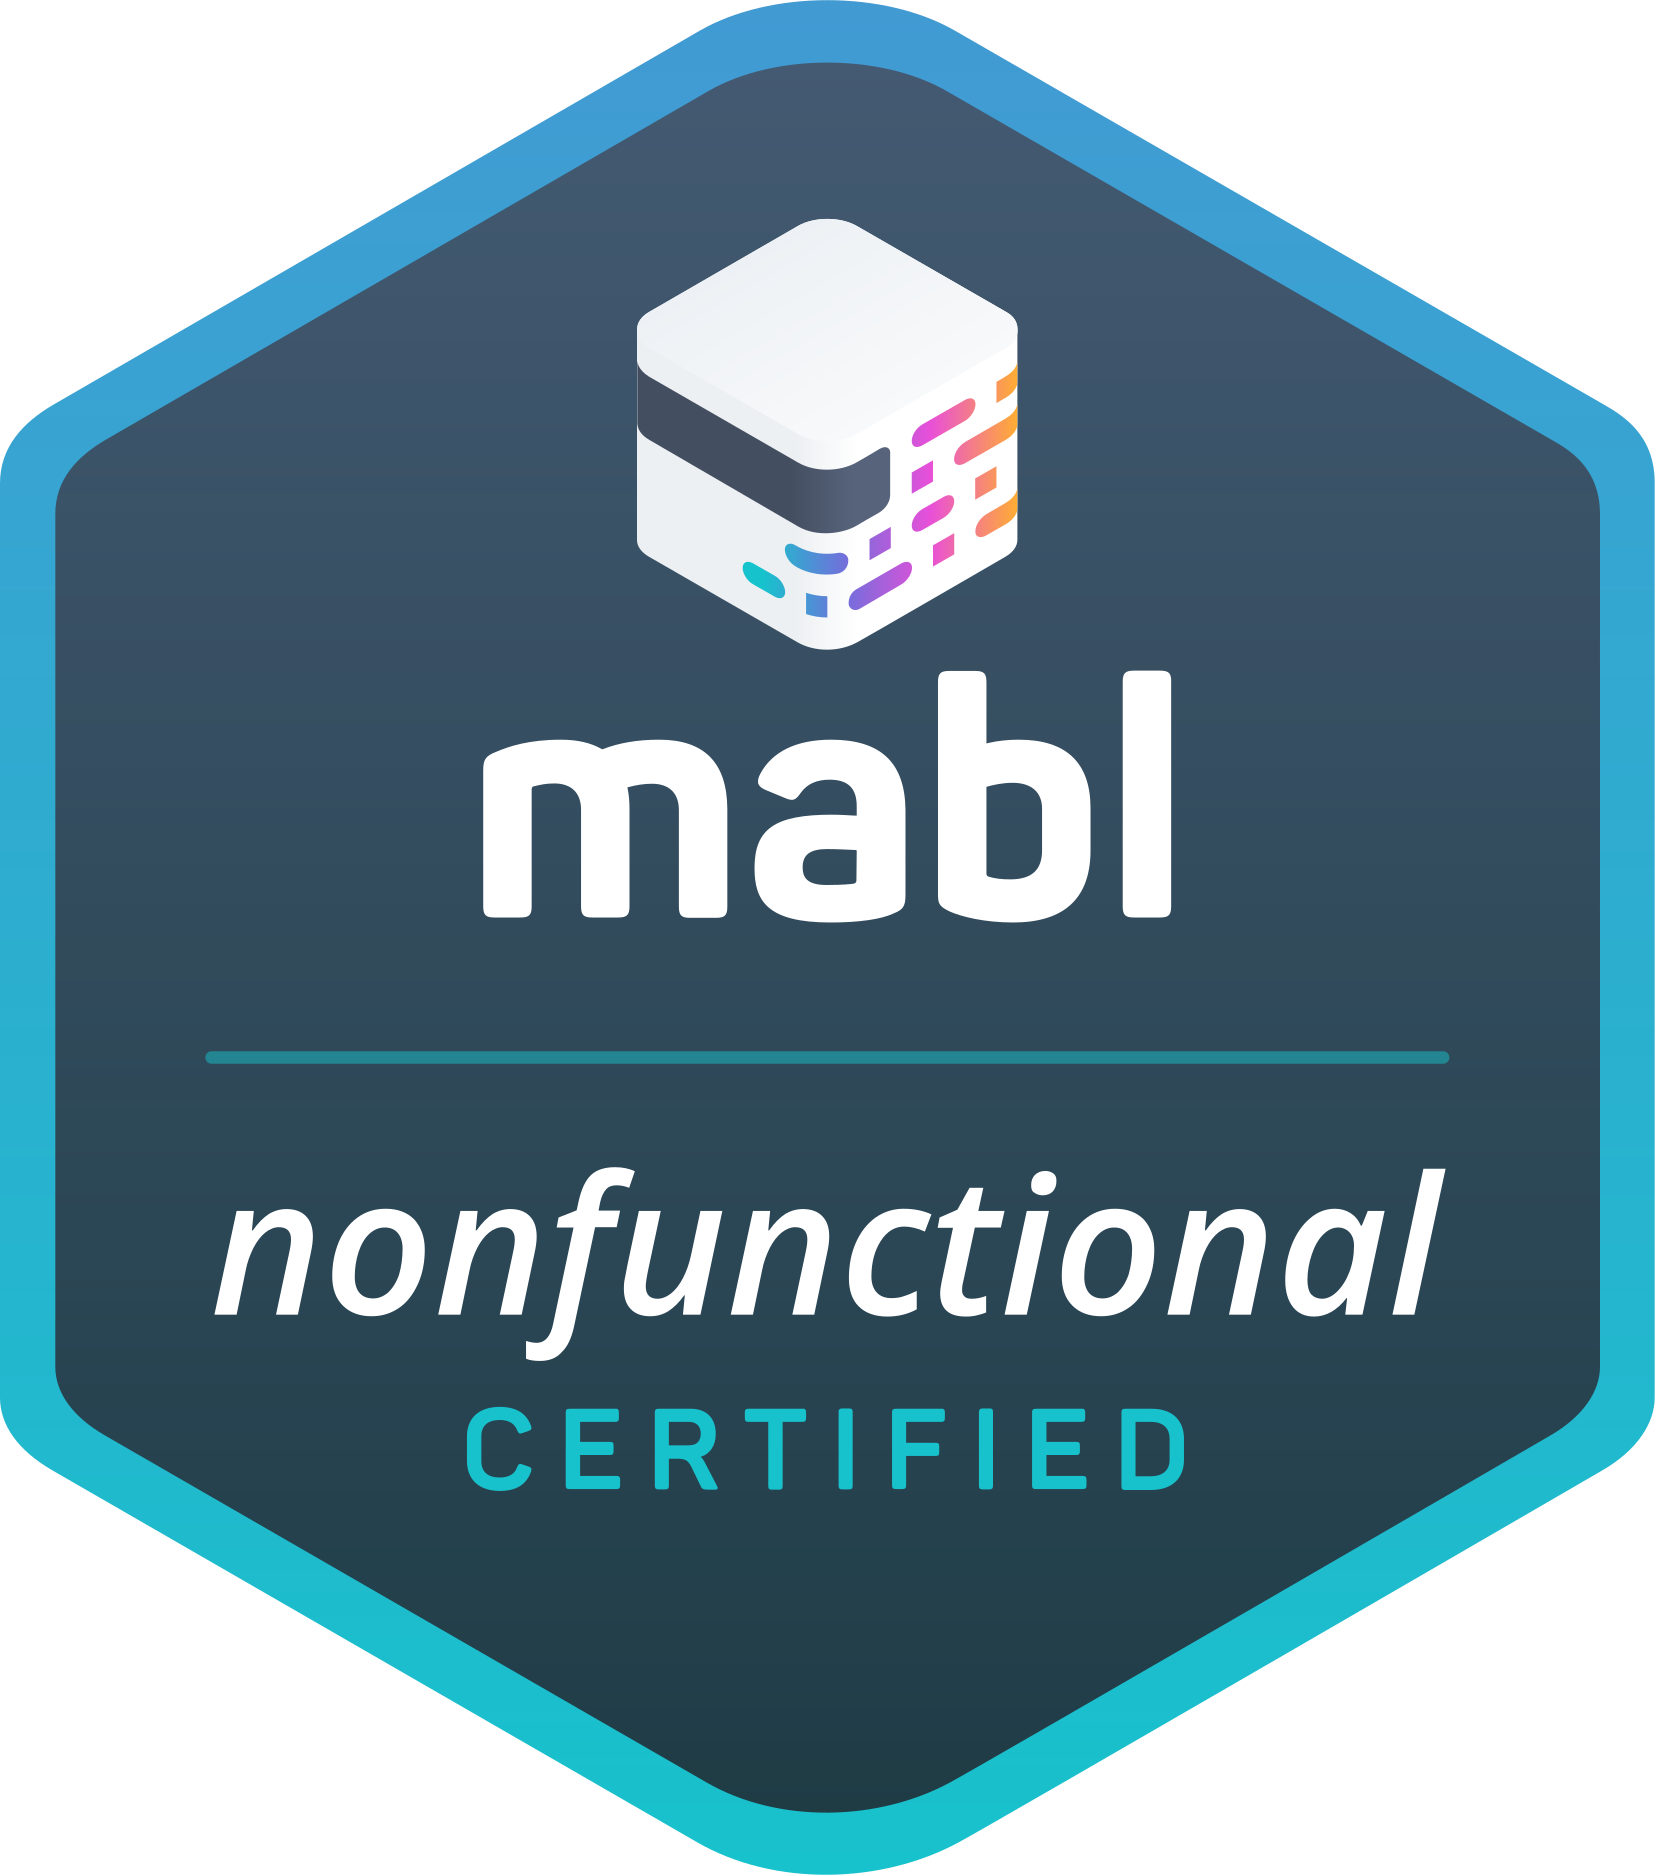 Mabl Certified Nonfunctional